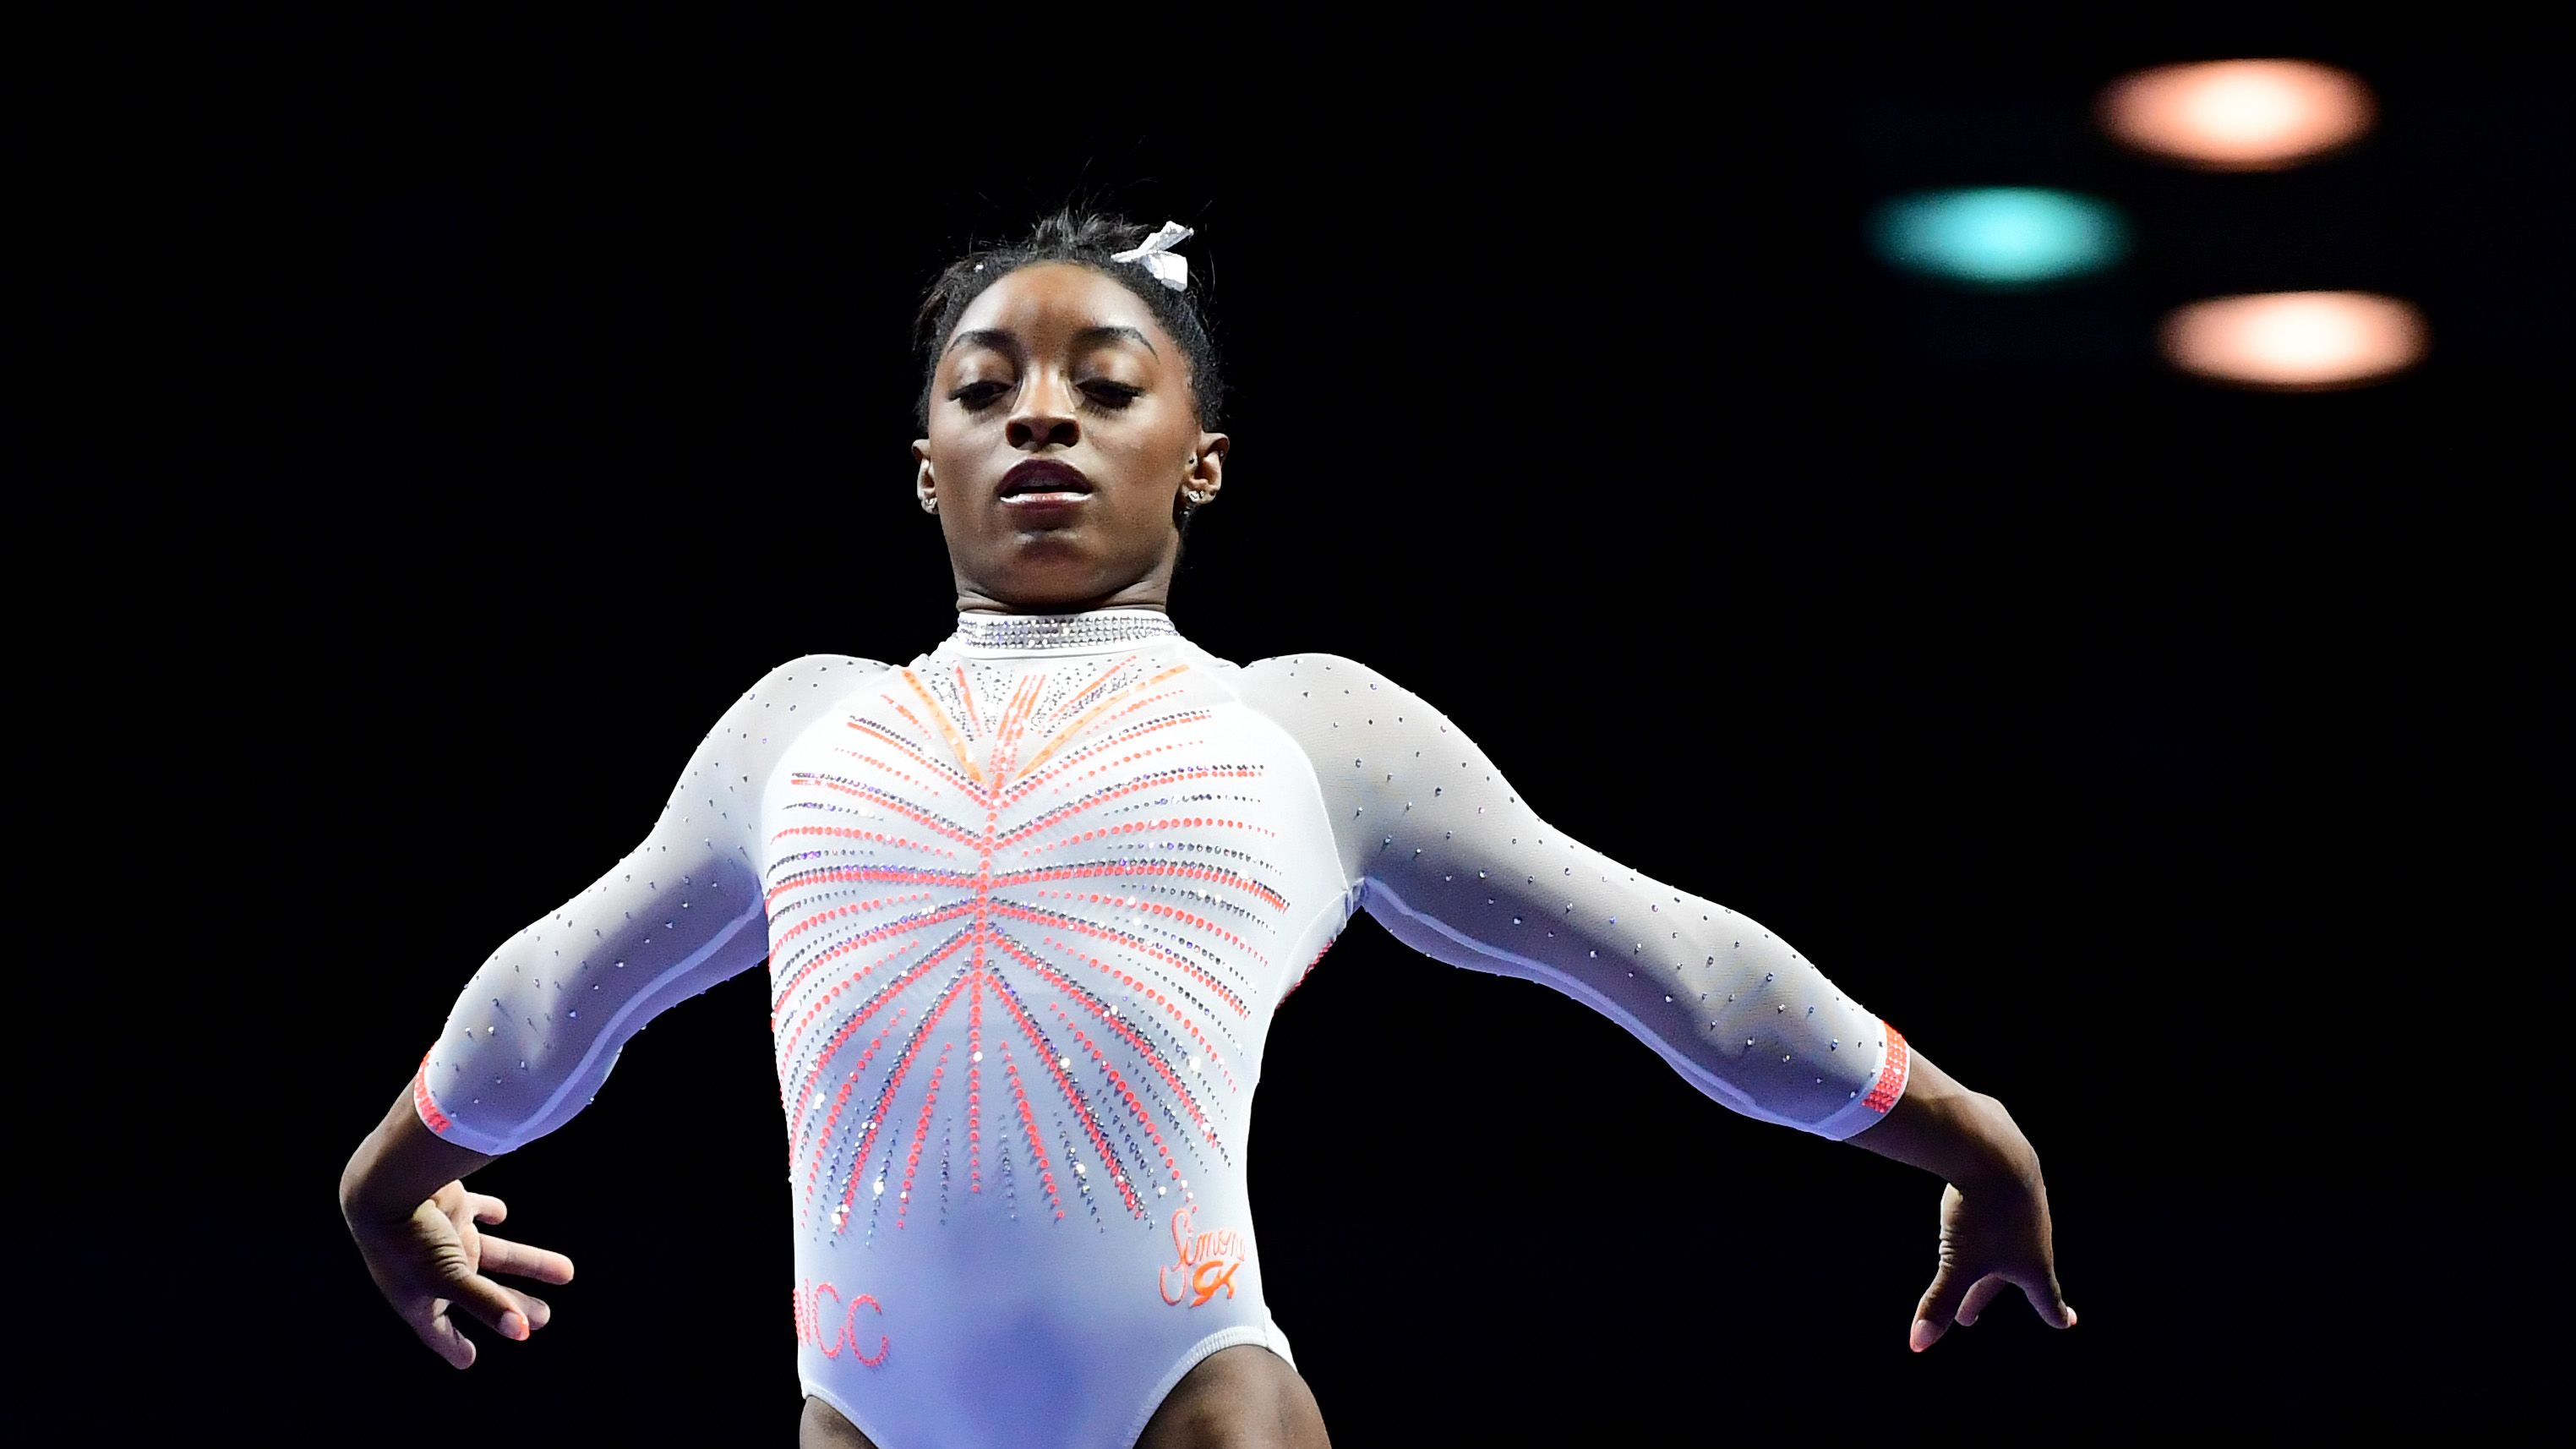 Simone Biles Is Working on Her 'Mindfulness' After Team Event